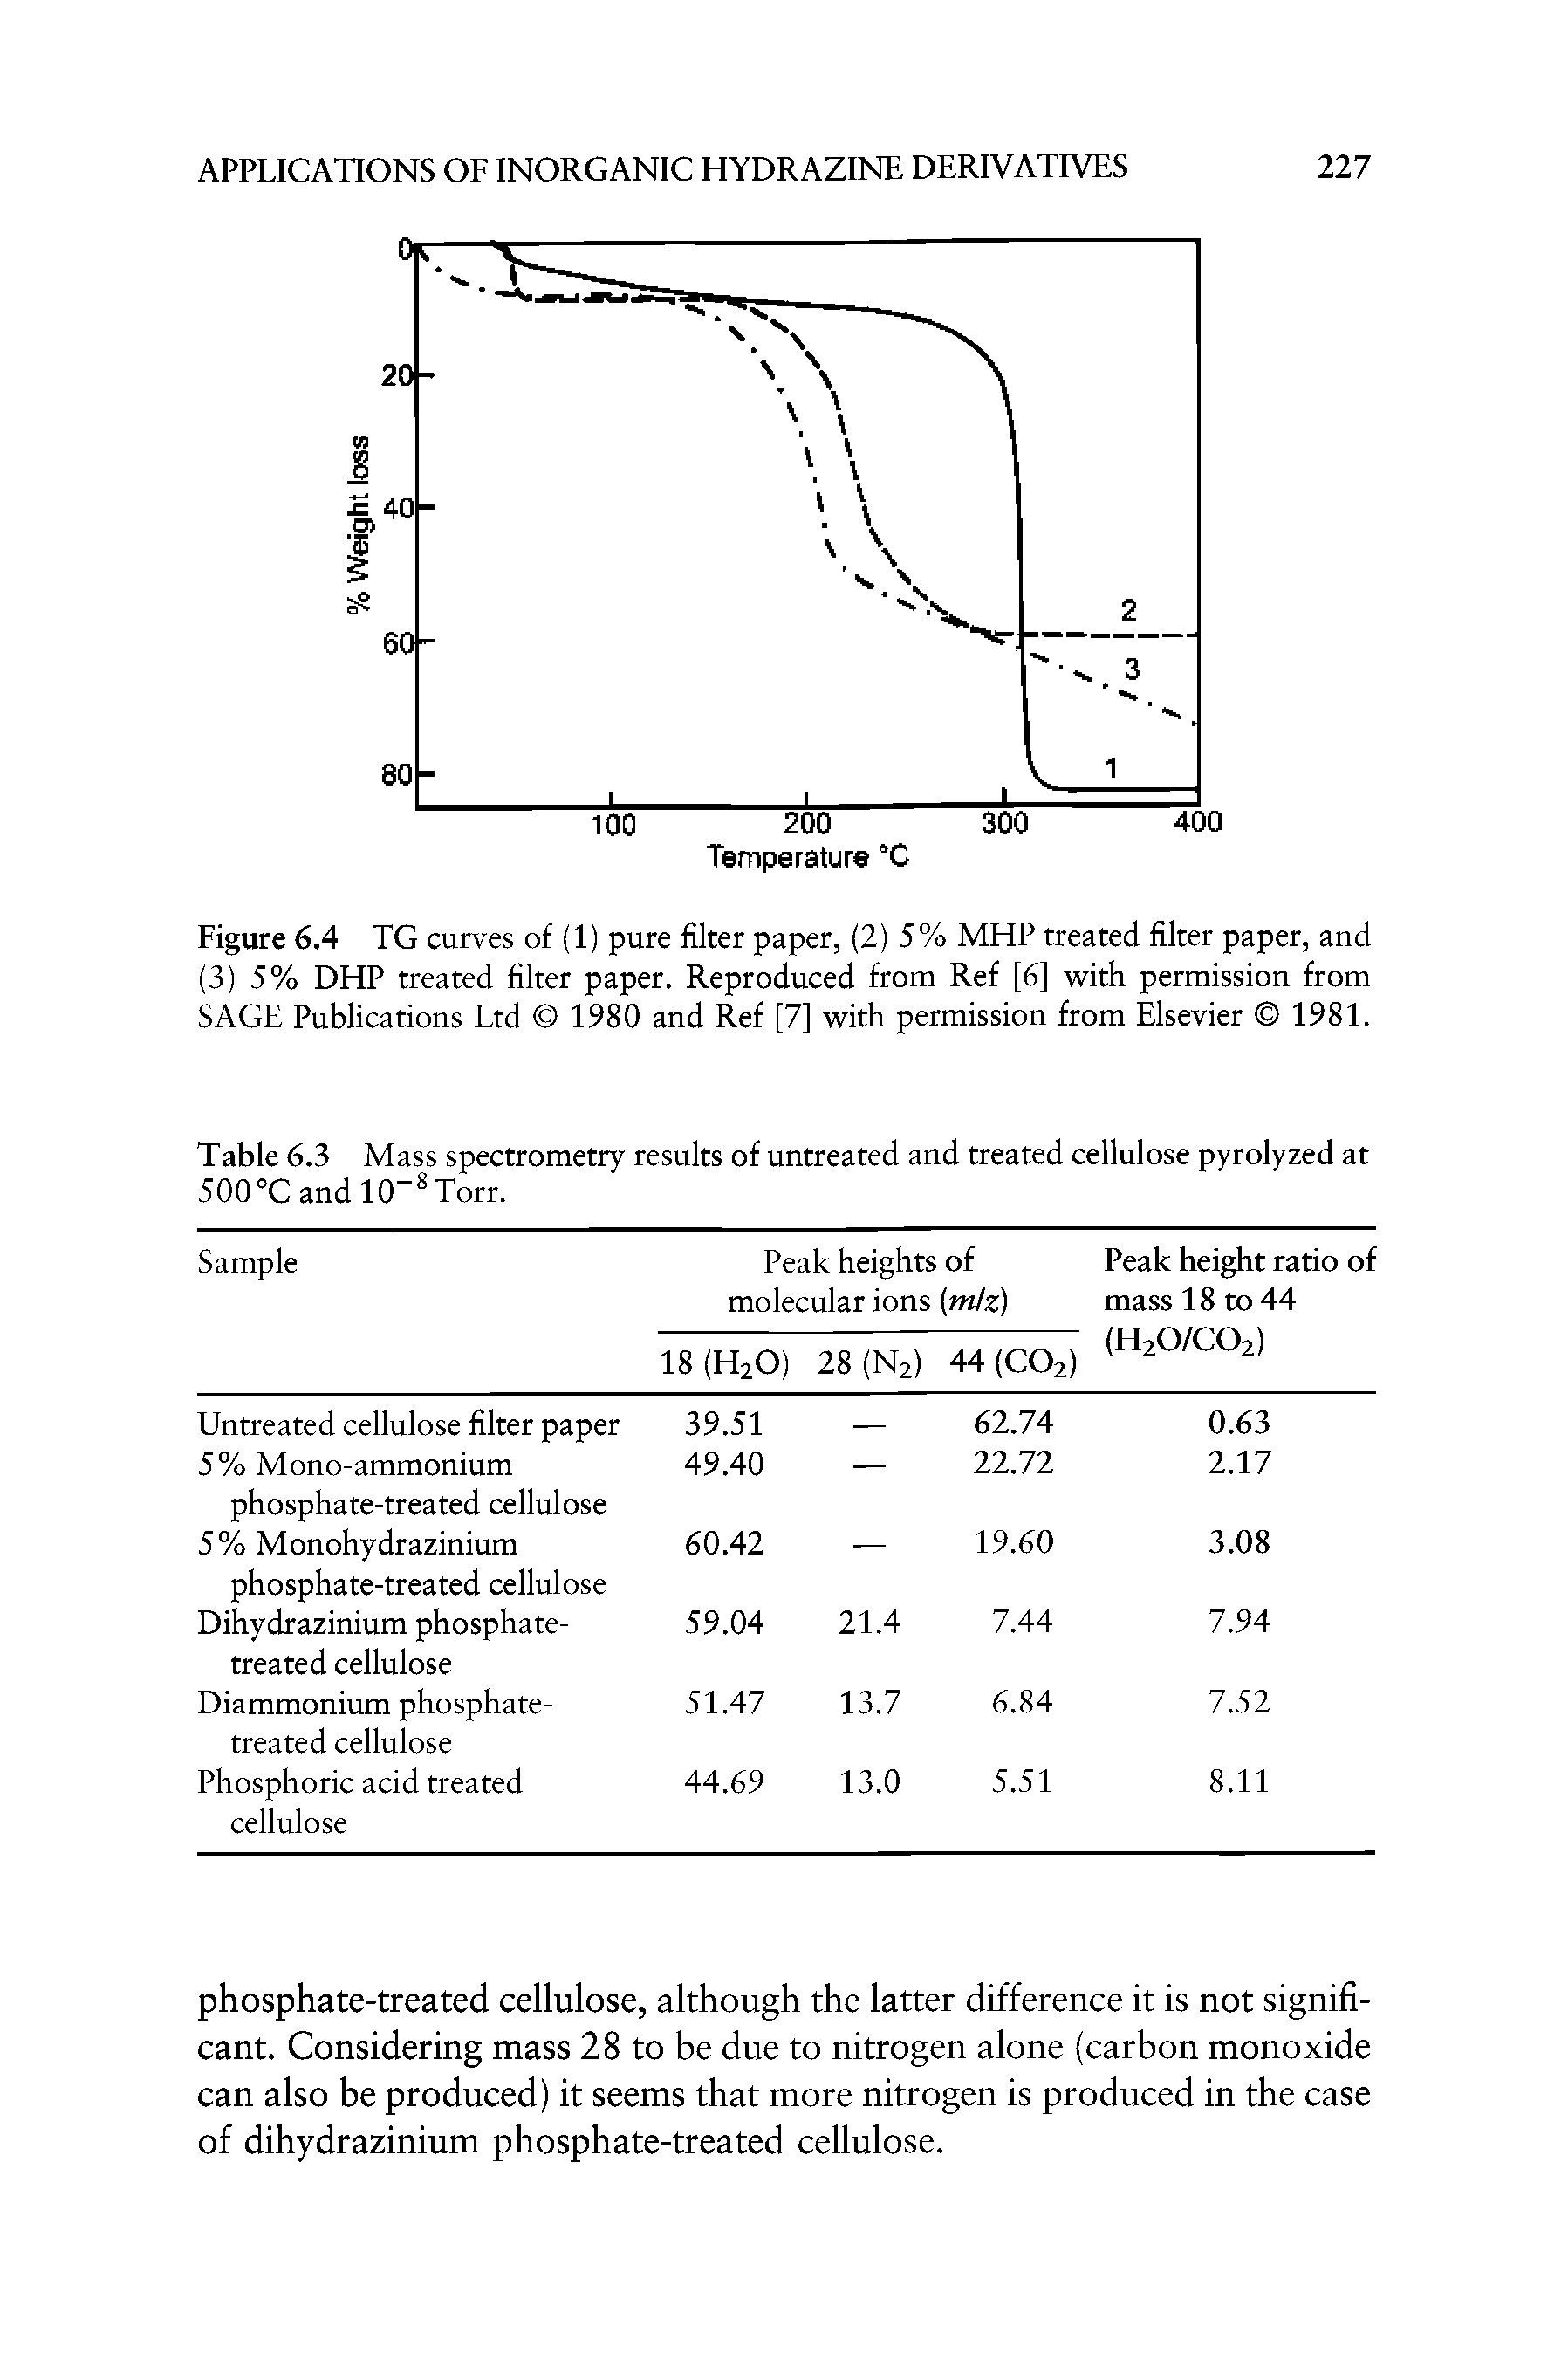 Figure 6.4 TG curves of (1) pure filter paper, (2) 5% MHP treated filter paper, and (3) 5% DHP treated filter paper. Reproduced from Ref [6] with permission from SAGE Publications Ltd 1980 and Ref [7] with permission from Elsevier 1981.